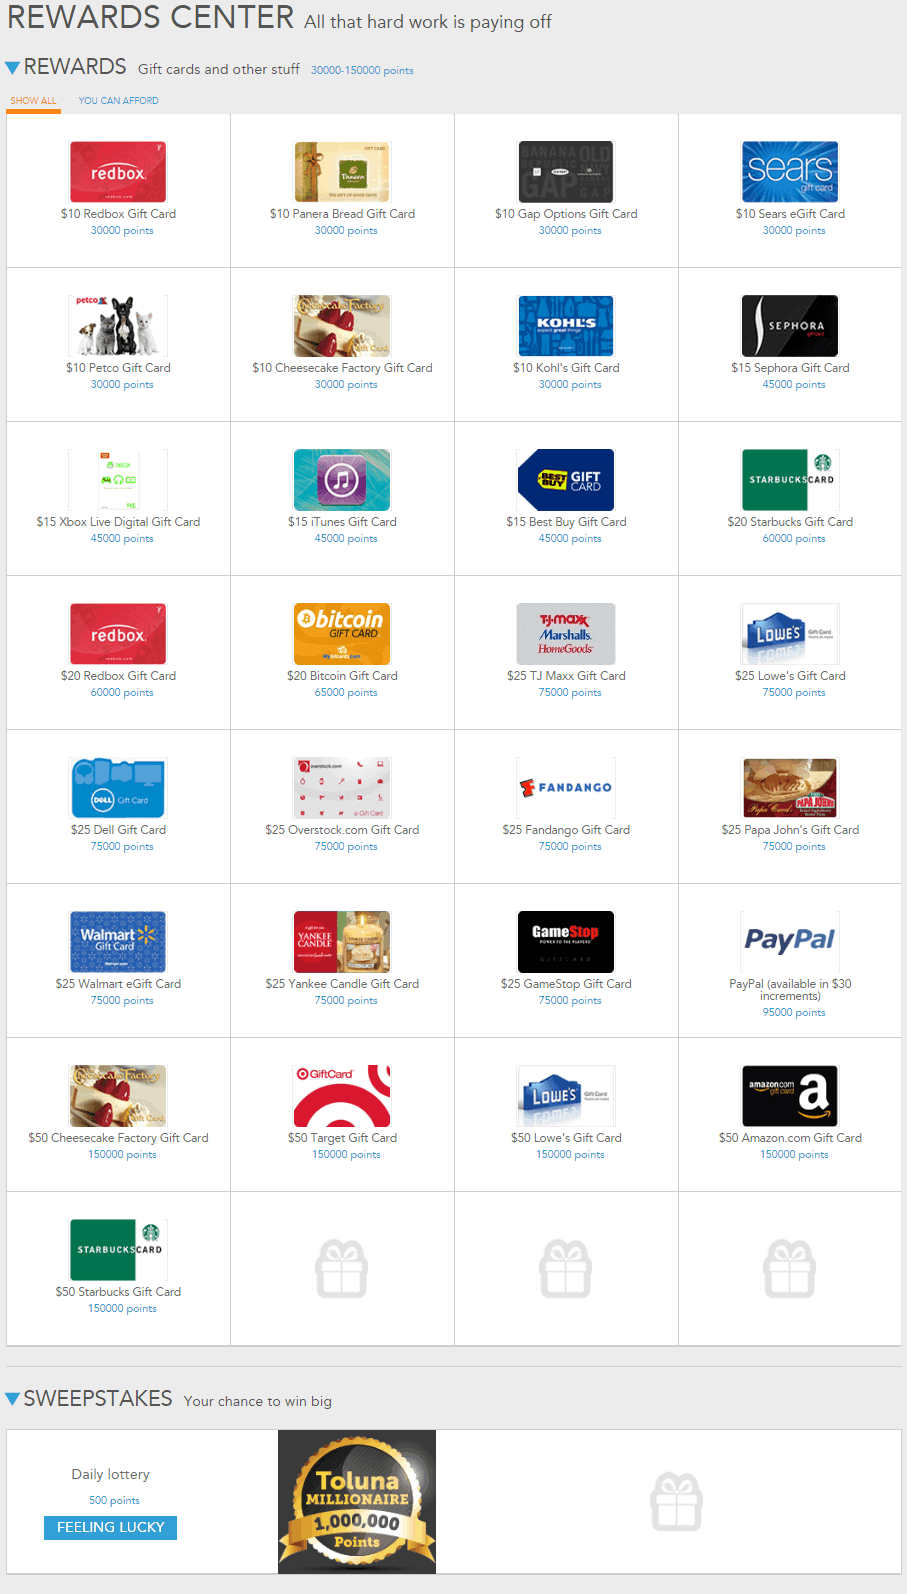 https://stoppingscams.com/wp-content/uploads/2014/10/Toluna-Rewards-Center-Gift-Cards-and-Sweepstakes.png